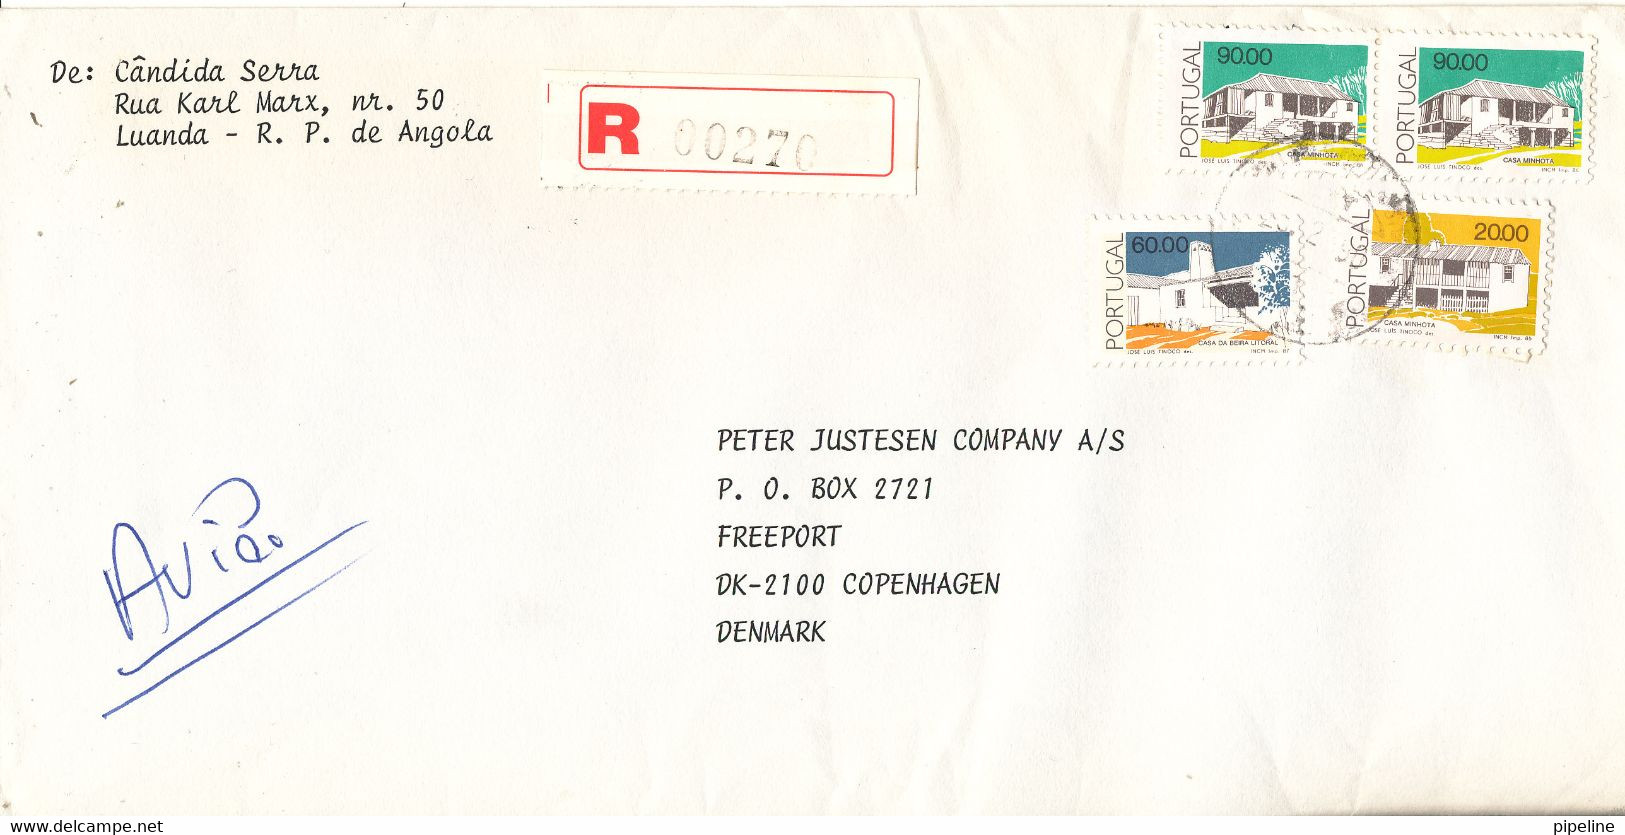 Portugal Registered Cover Sent Air Mail To Denmark 2-2-1990 (from Luanda Angola) - Covers & Documents